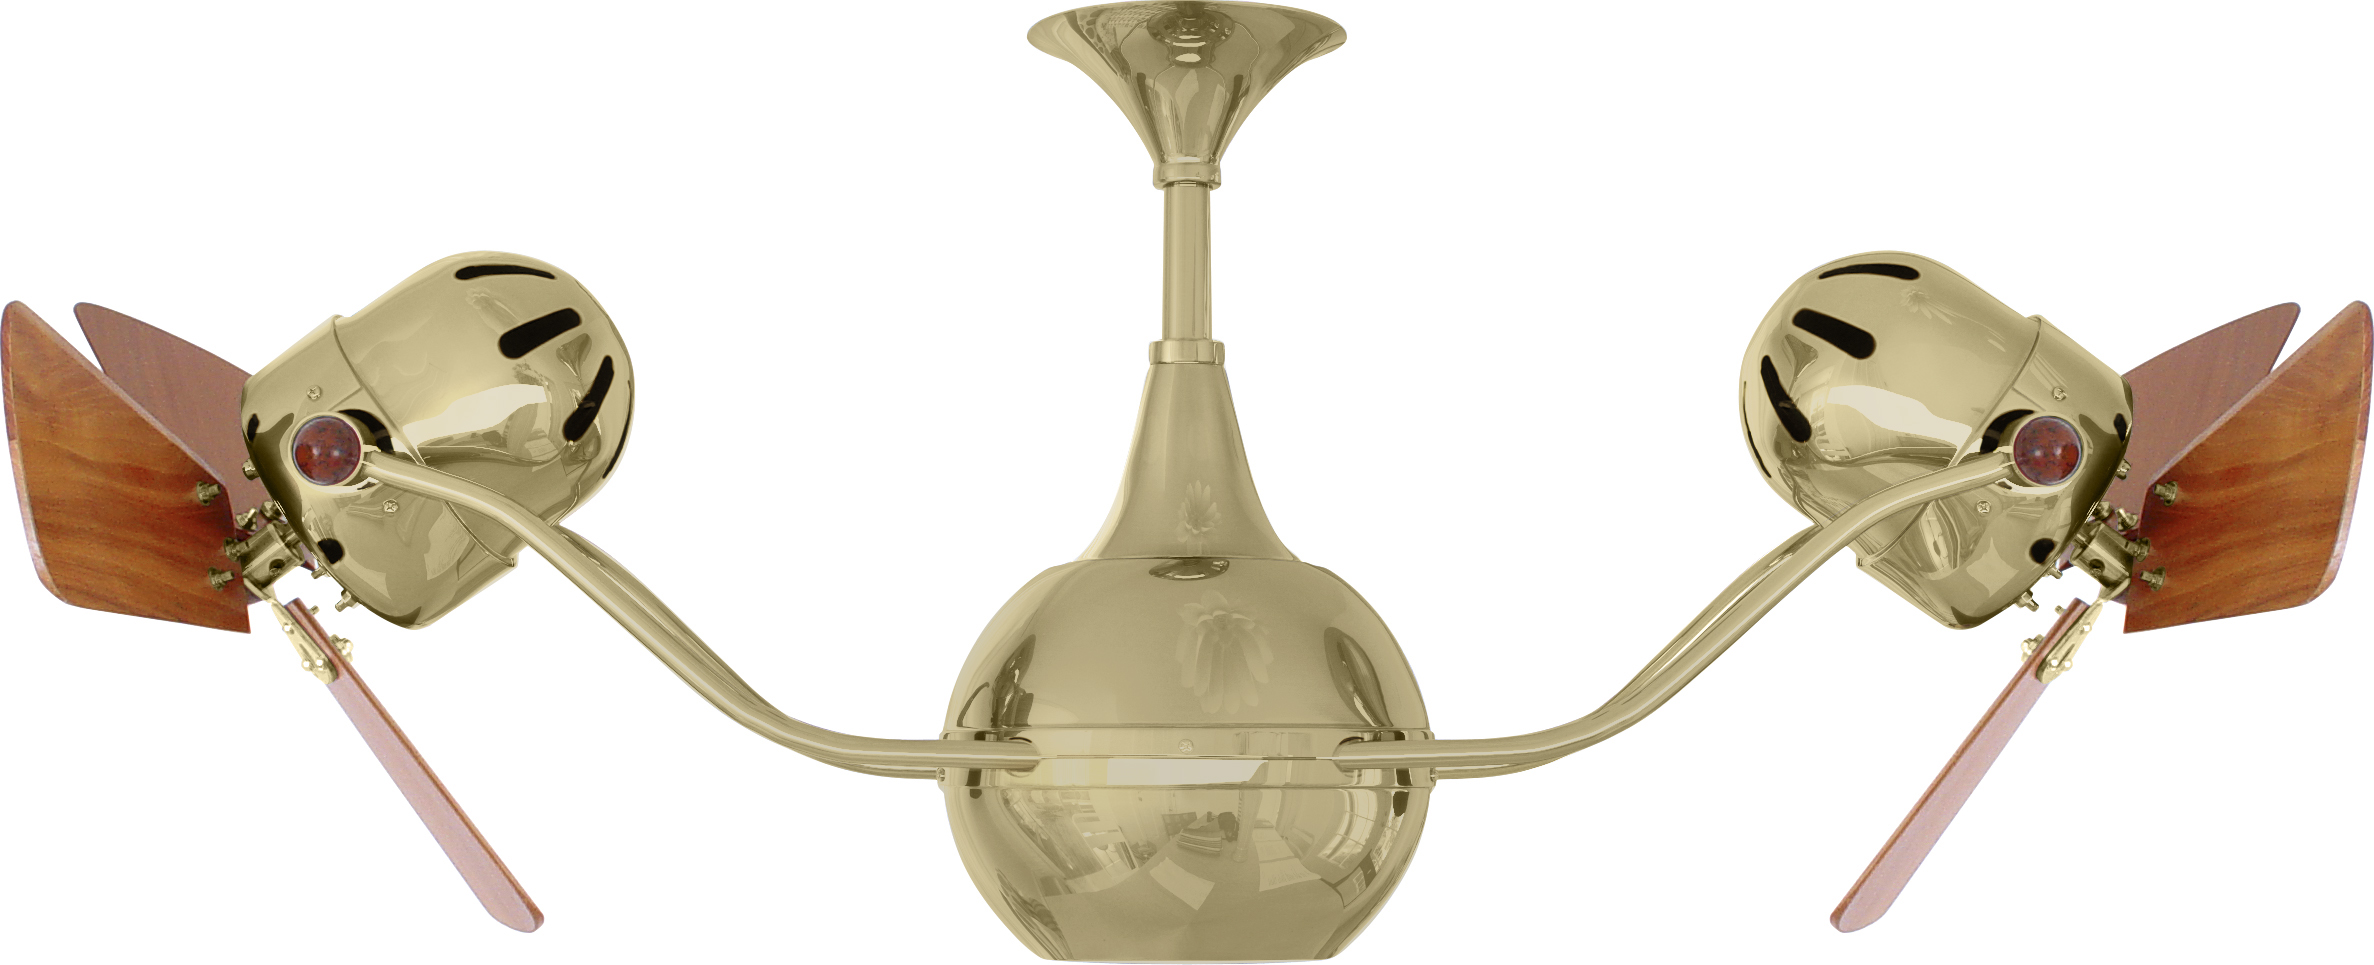 Vent-Bettina rotational dual head ceiling fan in Polished Brass finish with mahogany wood blades made by Matthews Fan Company.